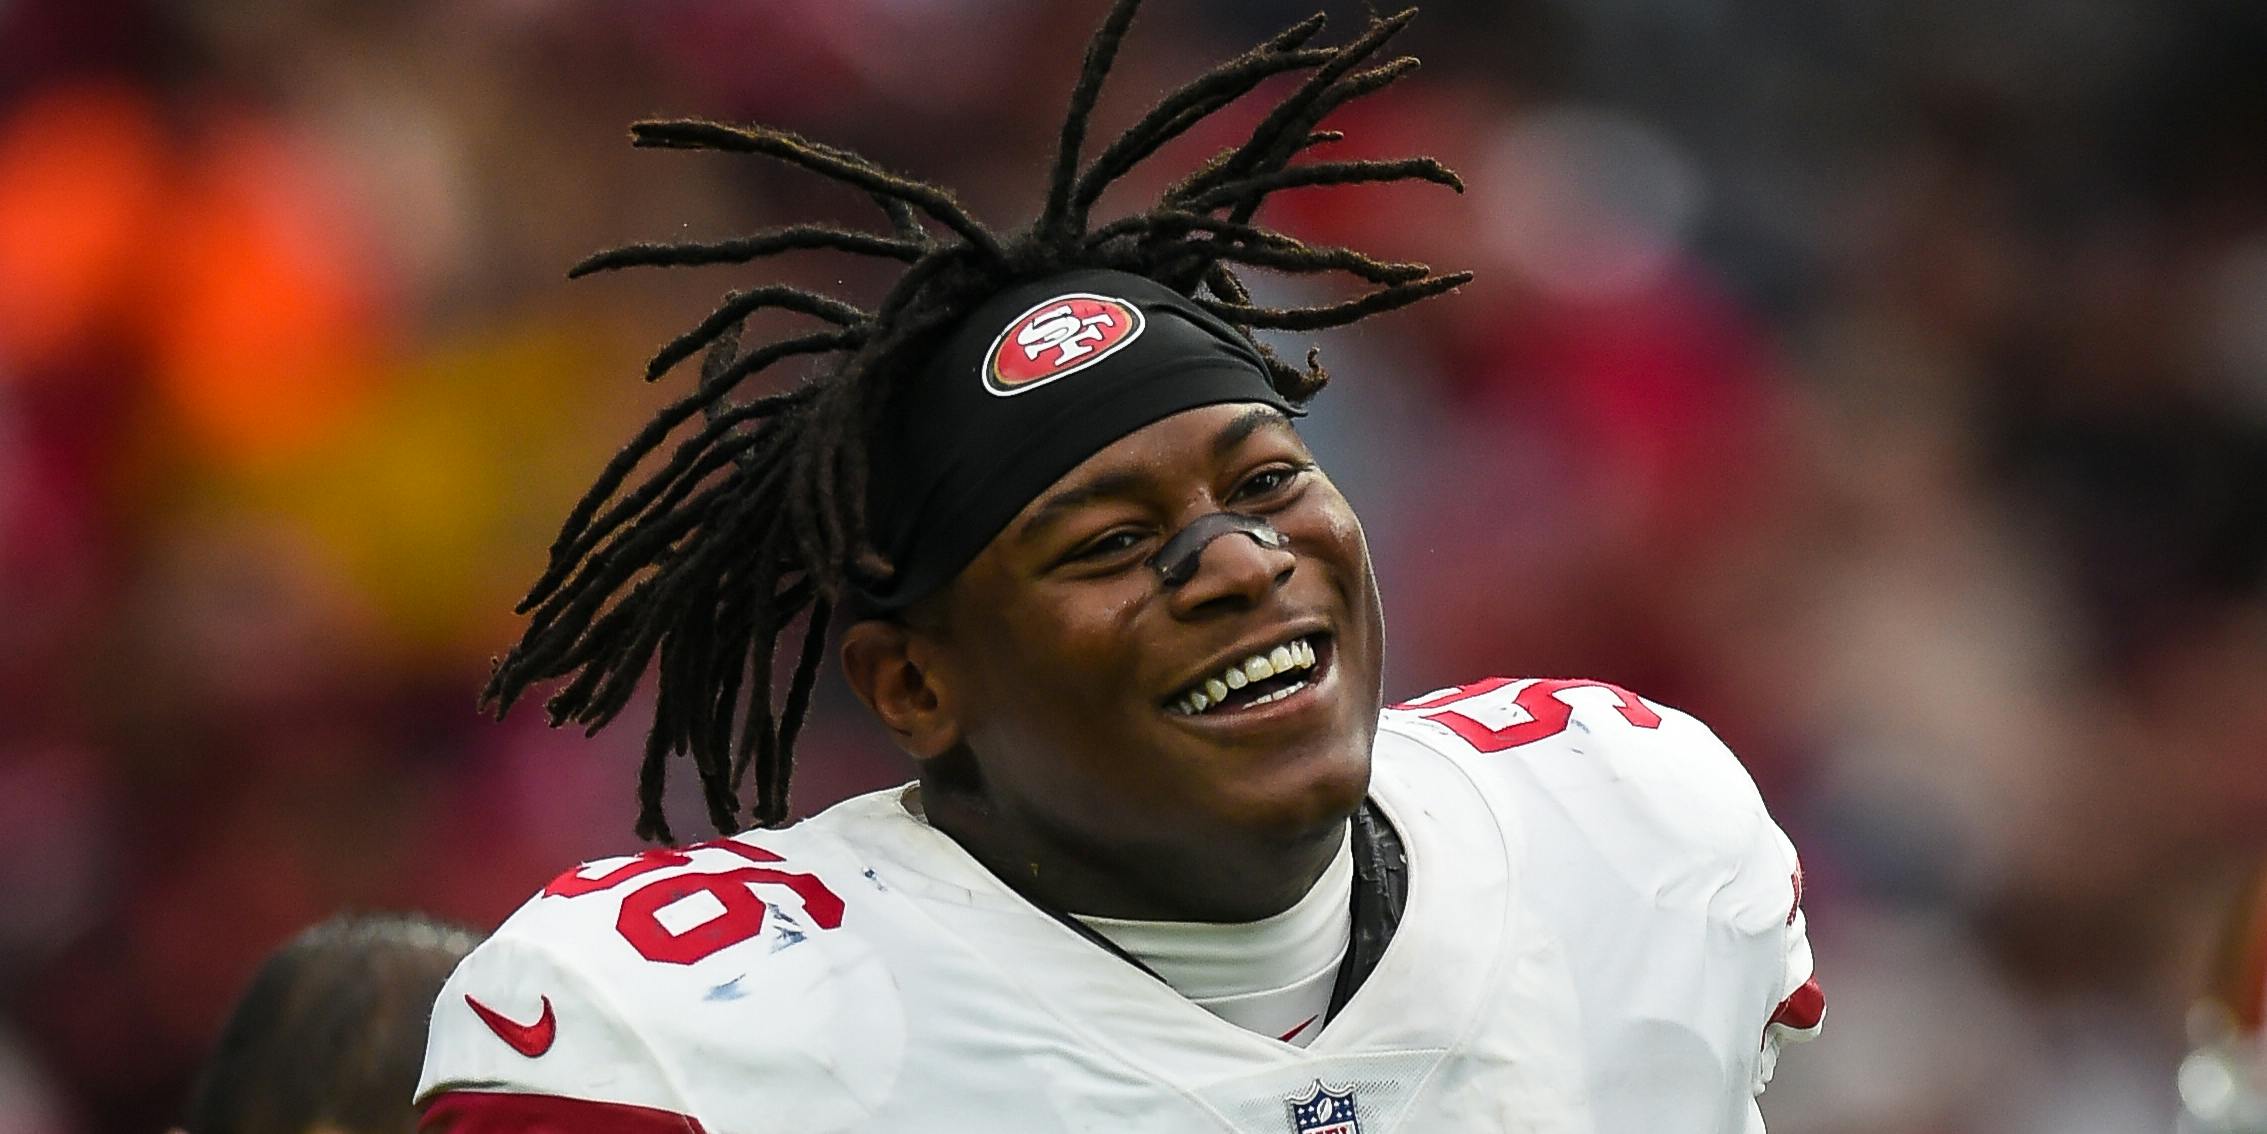 Reuben Foster of the San Fransisco 49ers smiling during a game